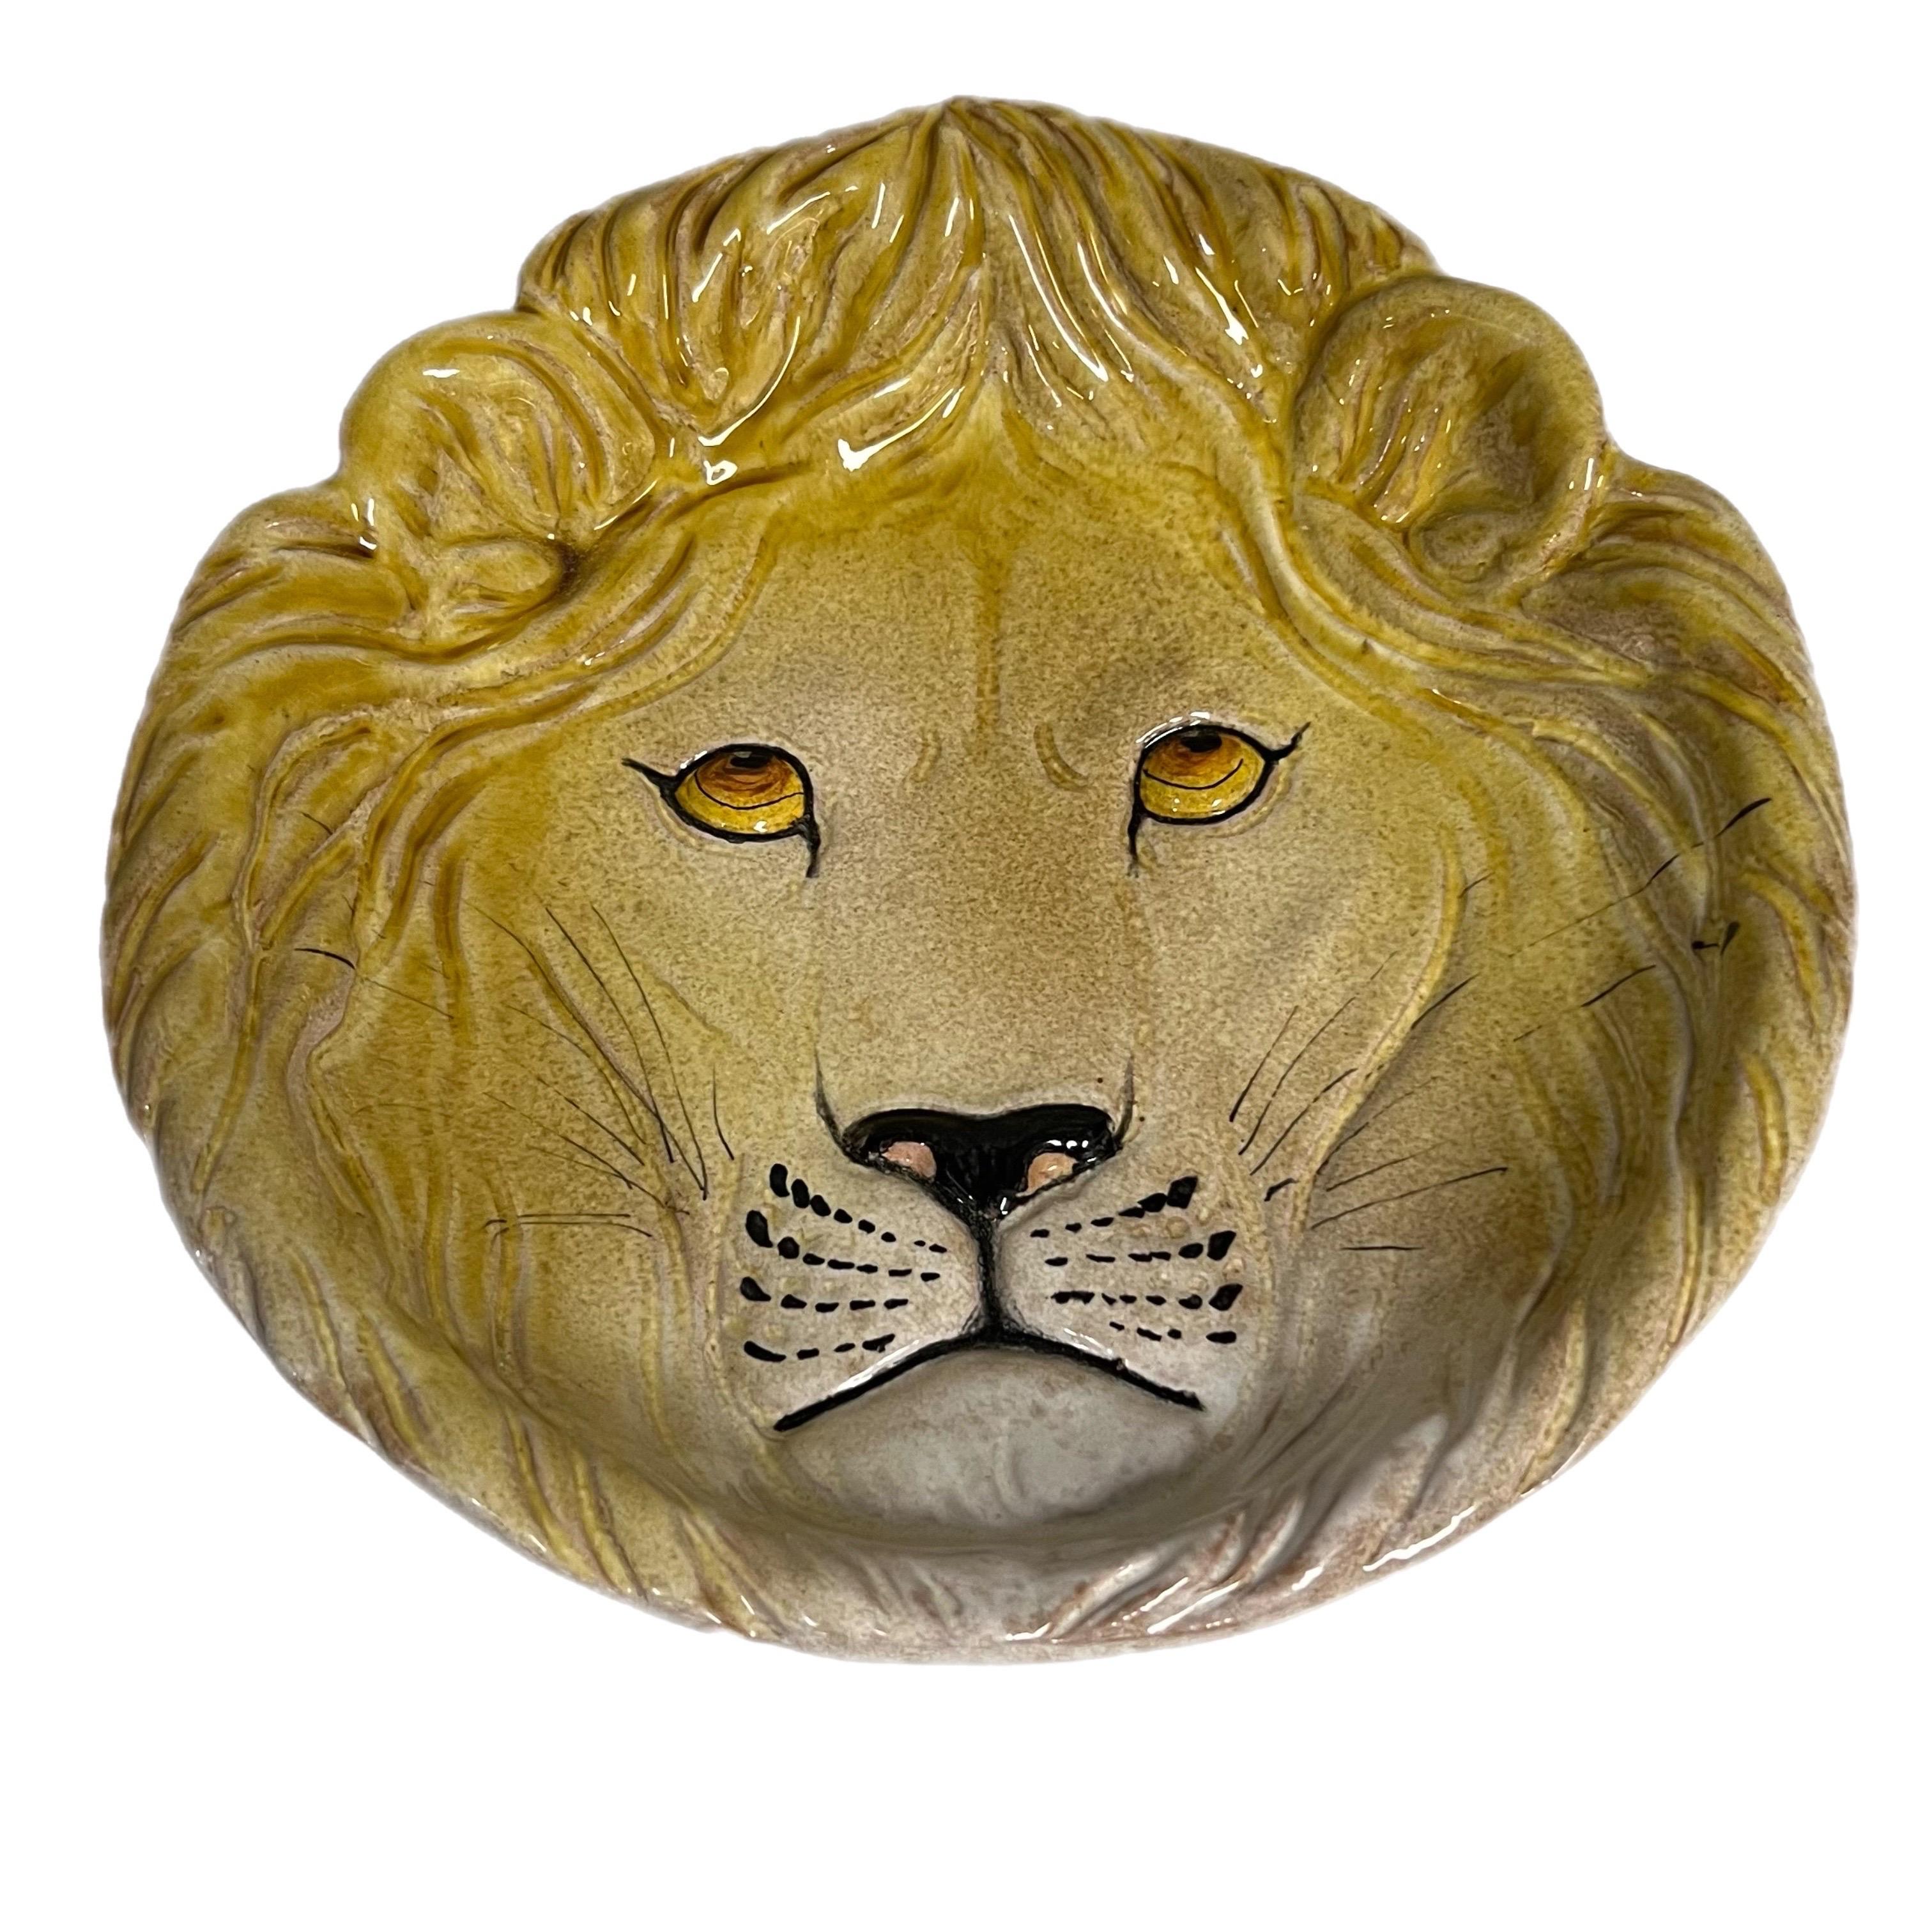 Vintage Lion Head Ceramic Art Sculpture Display Plate 
Big Cats Collection Made In Italy  8 1/2